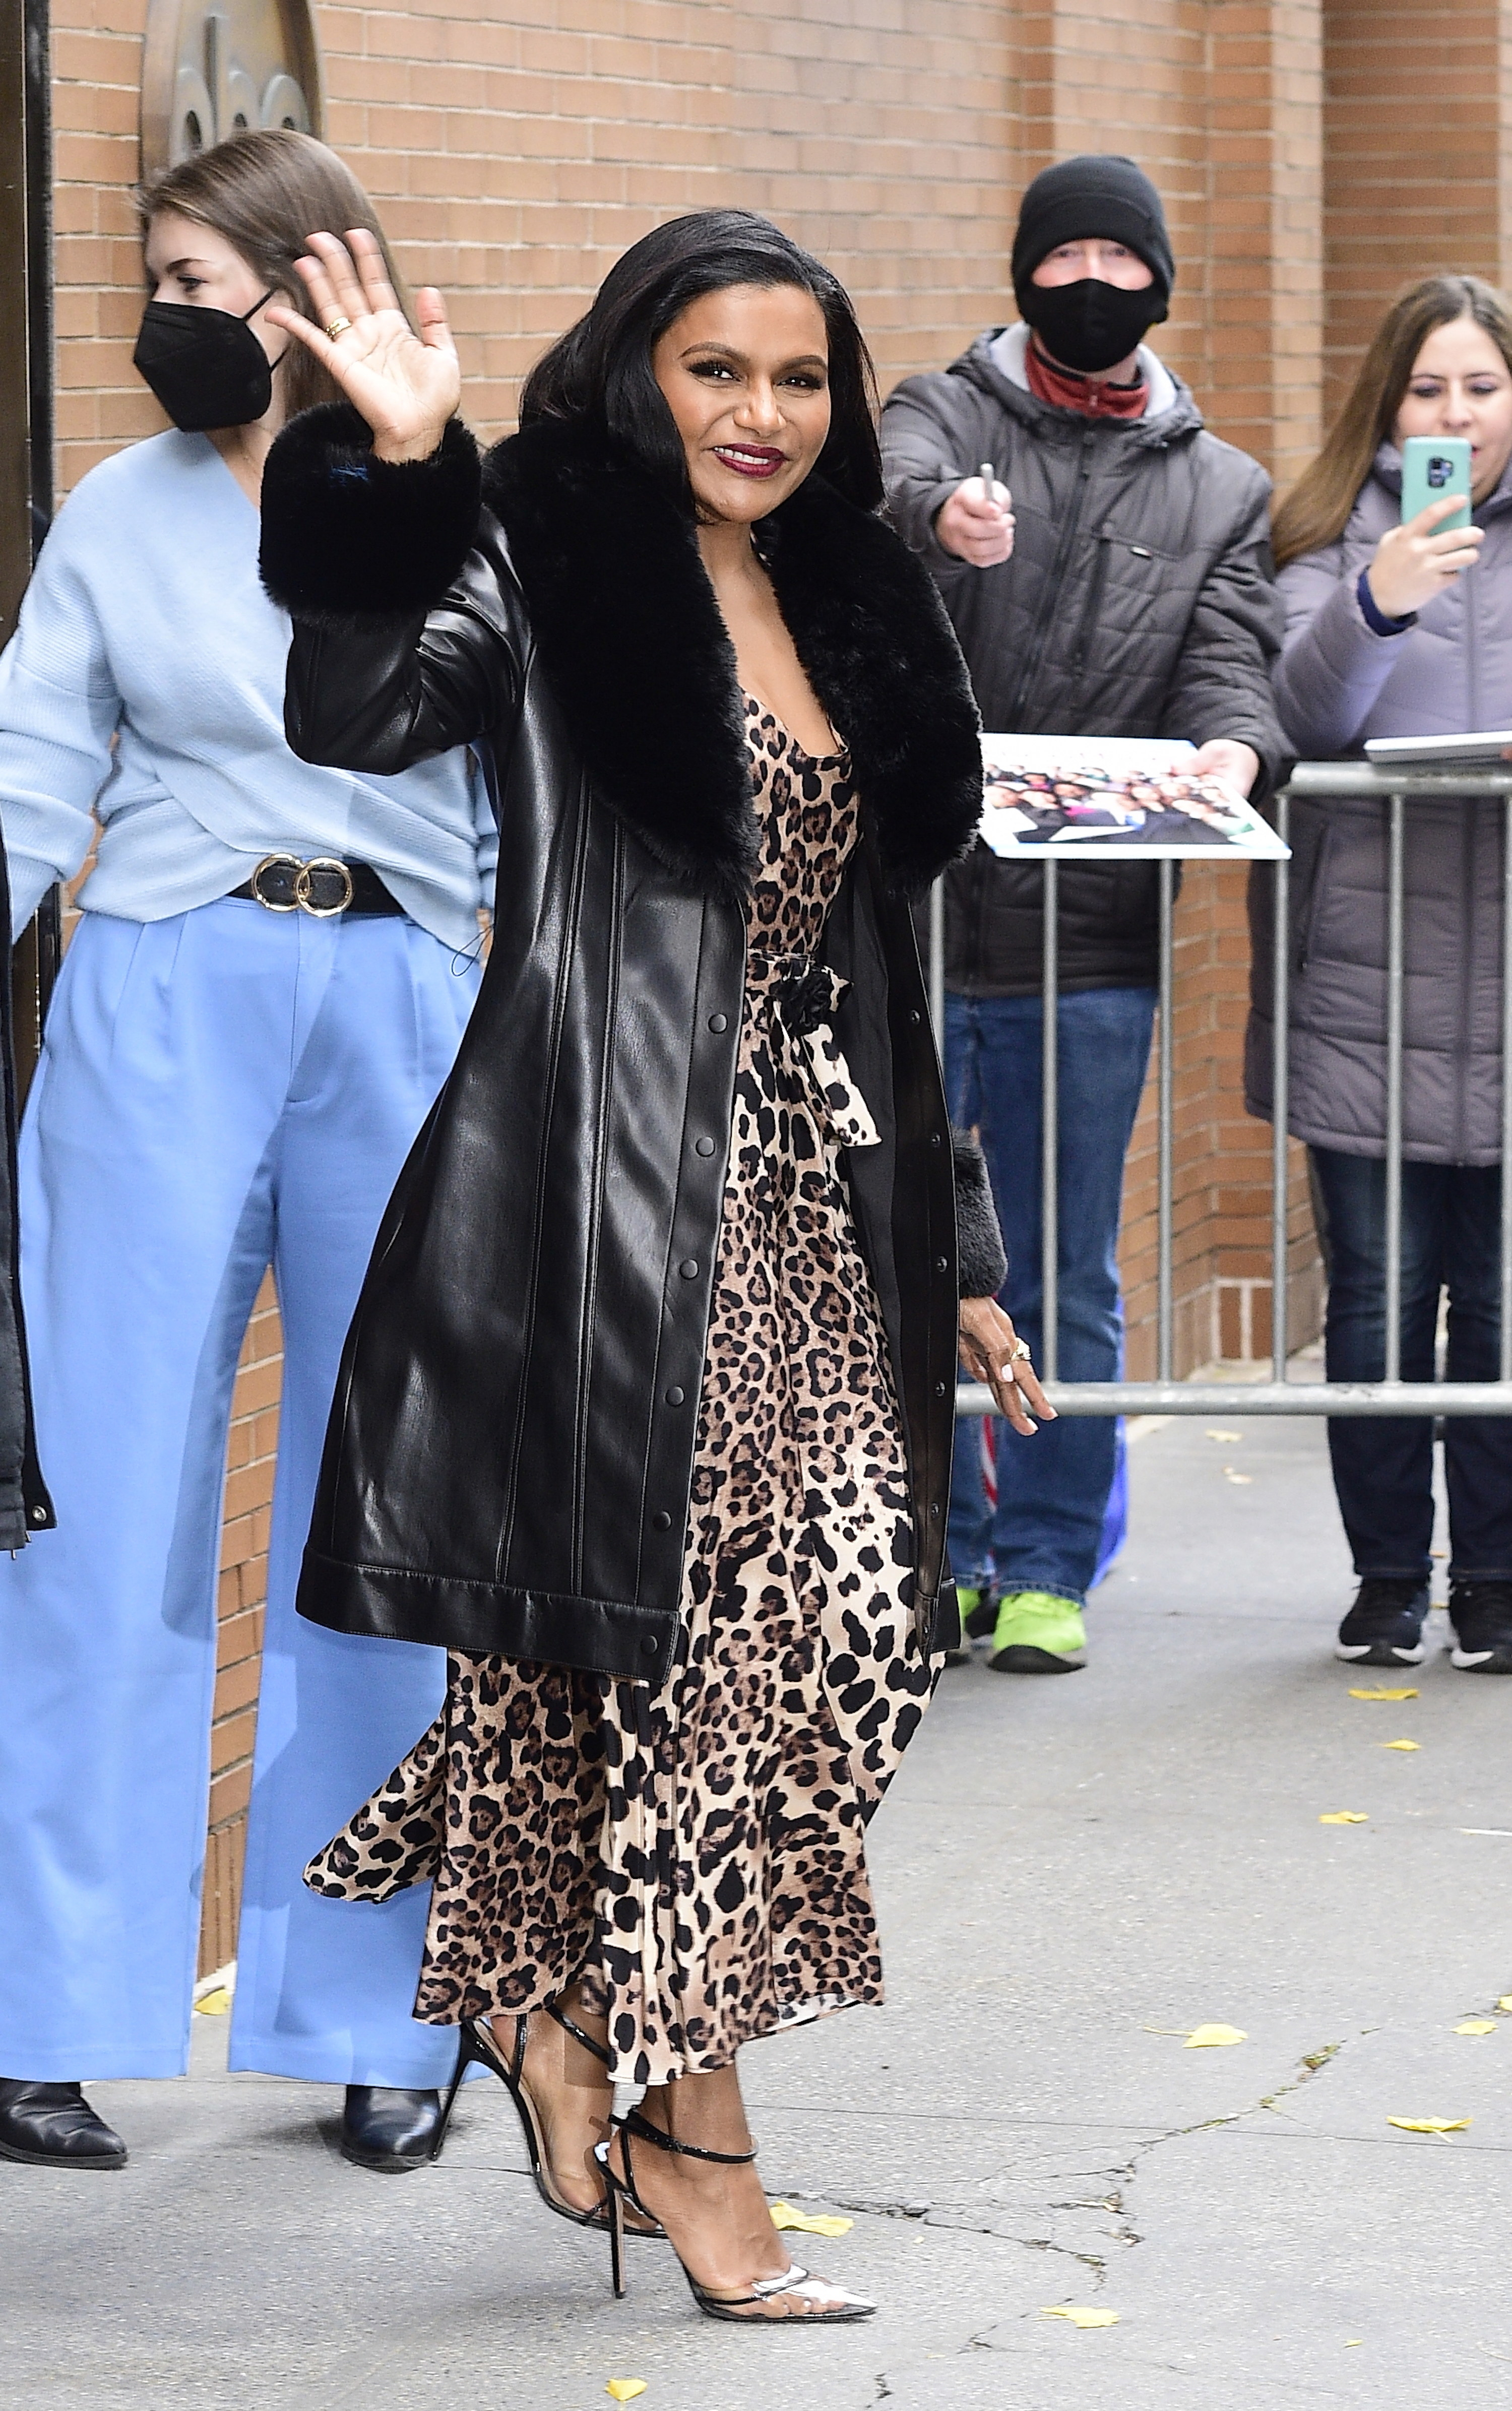 Mindy waves to a crowd as she exits a building